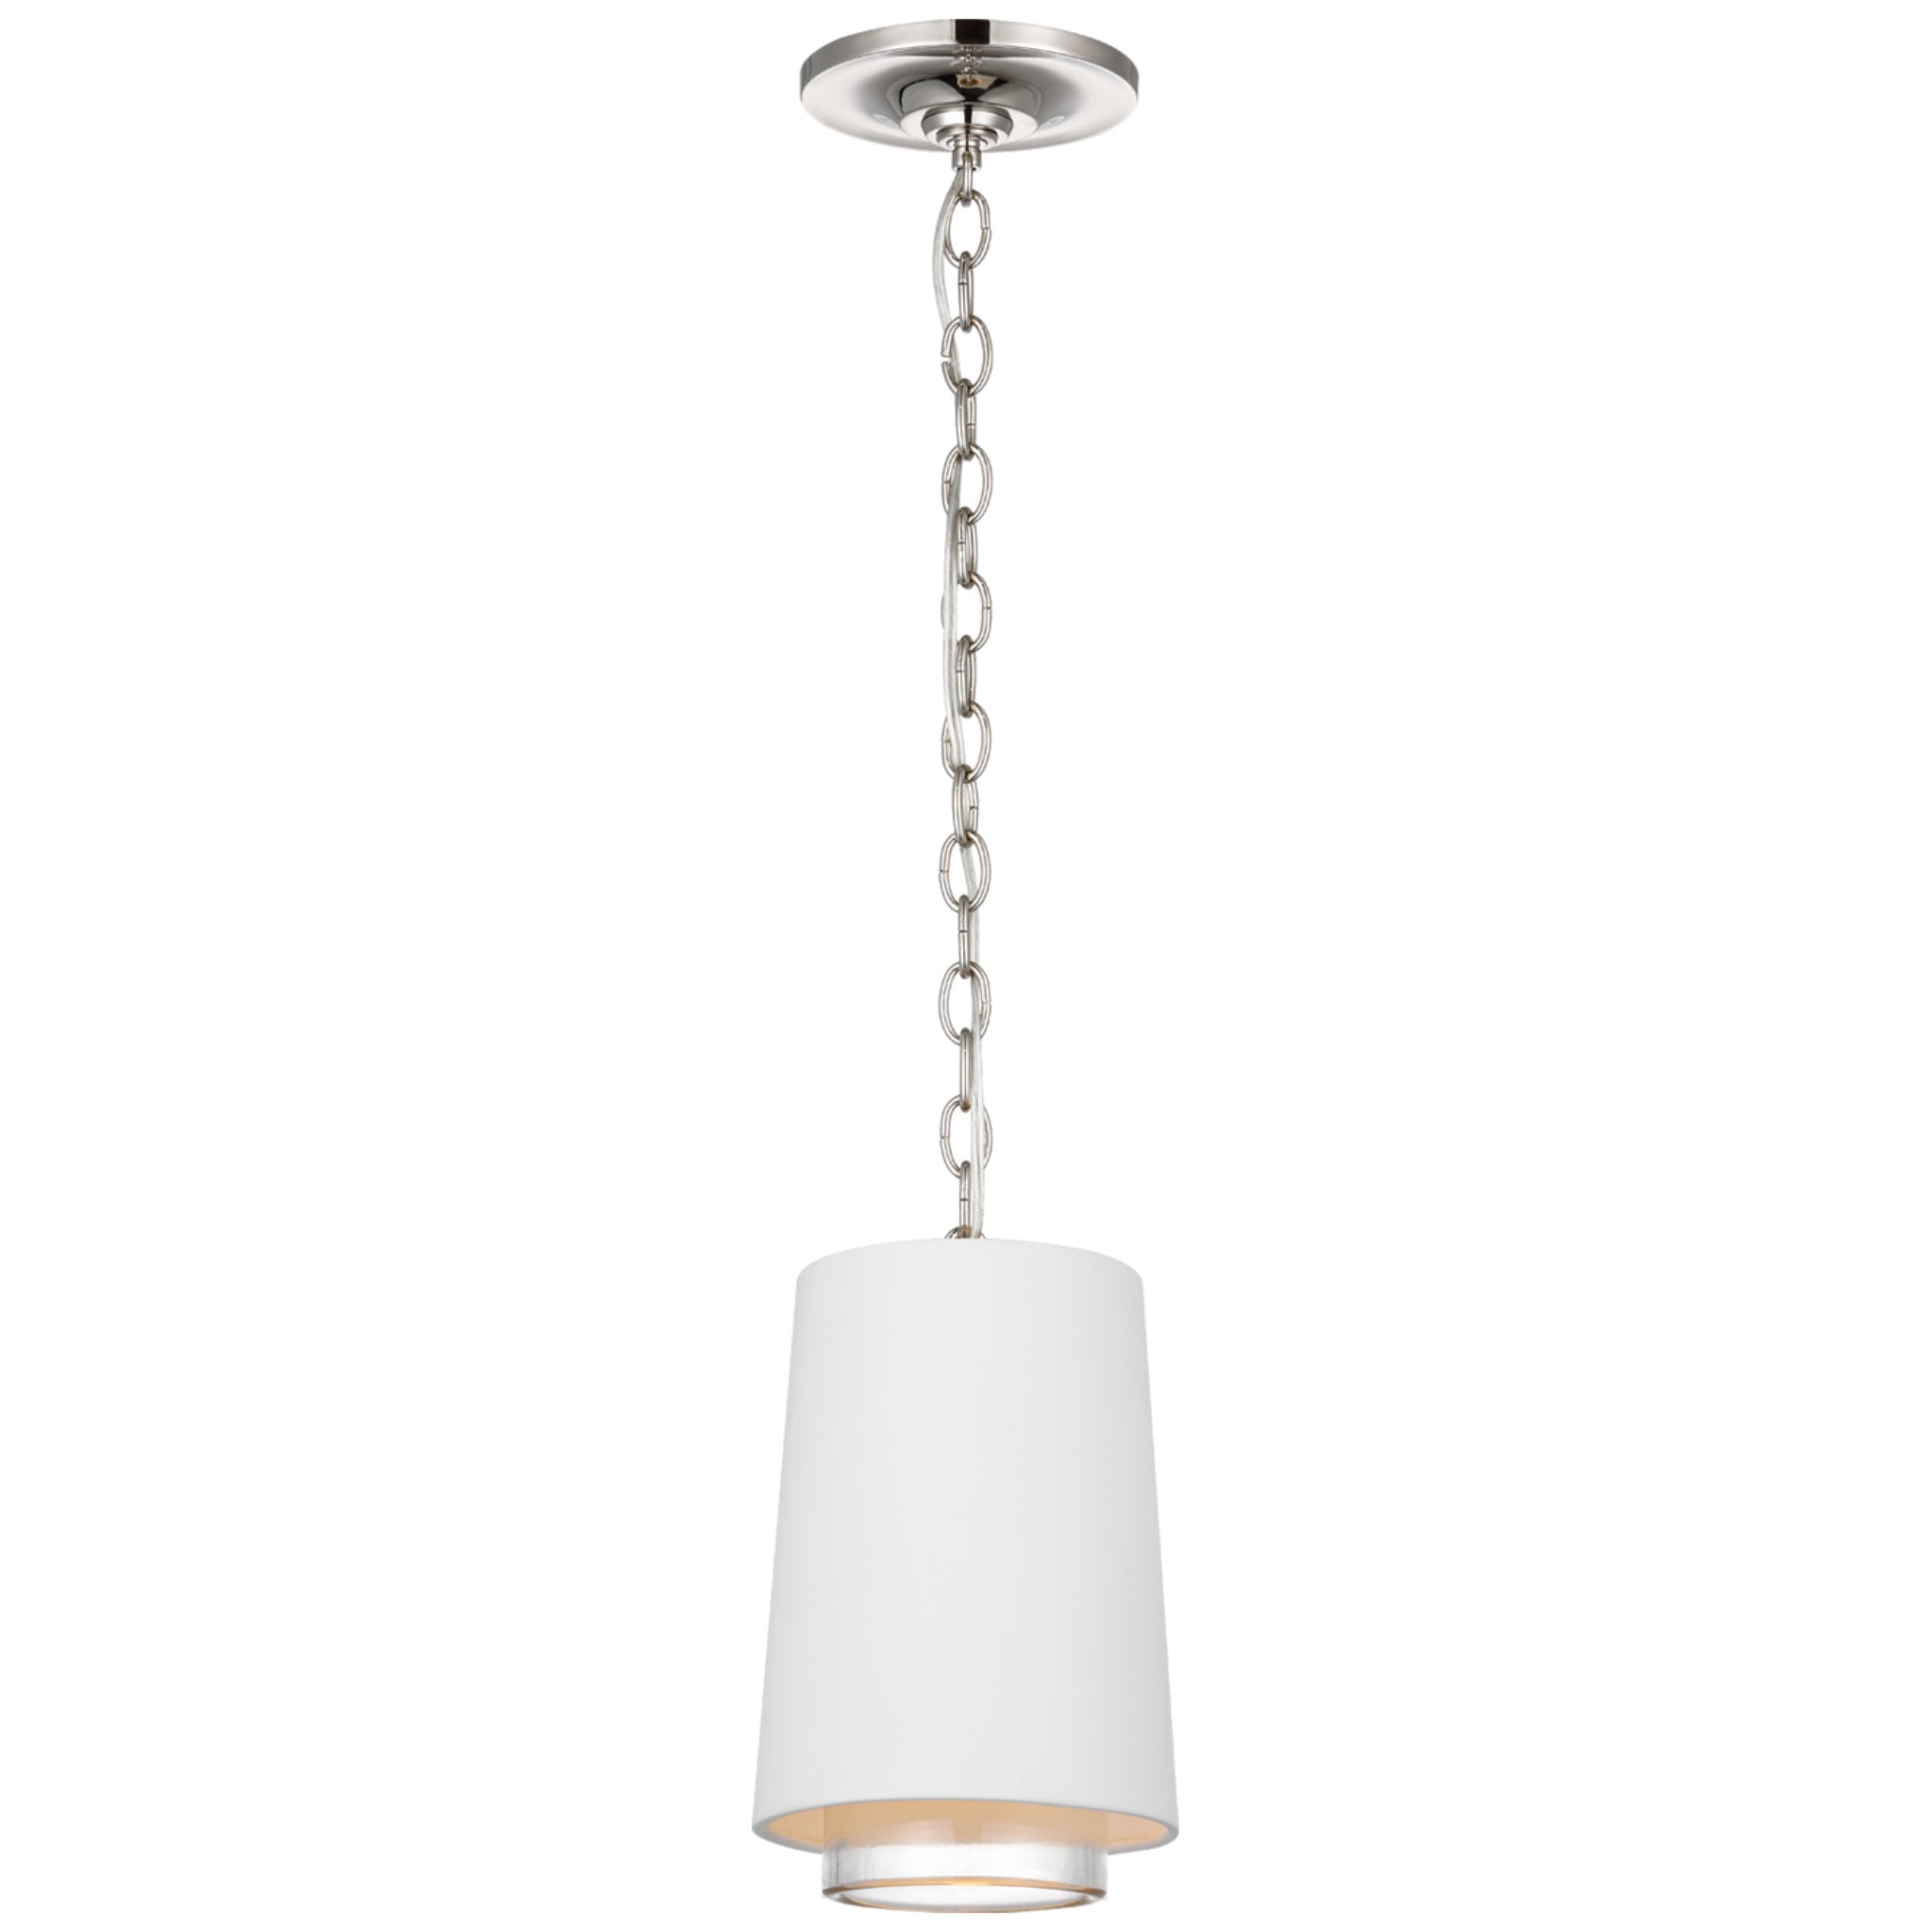 Marie Flanigan Sydney Narrow Pendant in Polished Nickel with Matte White Shade and Clear Glass